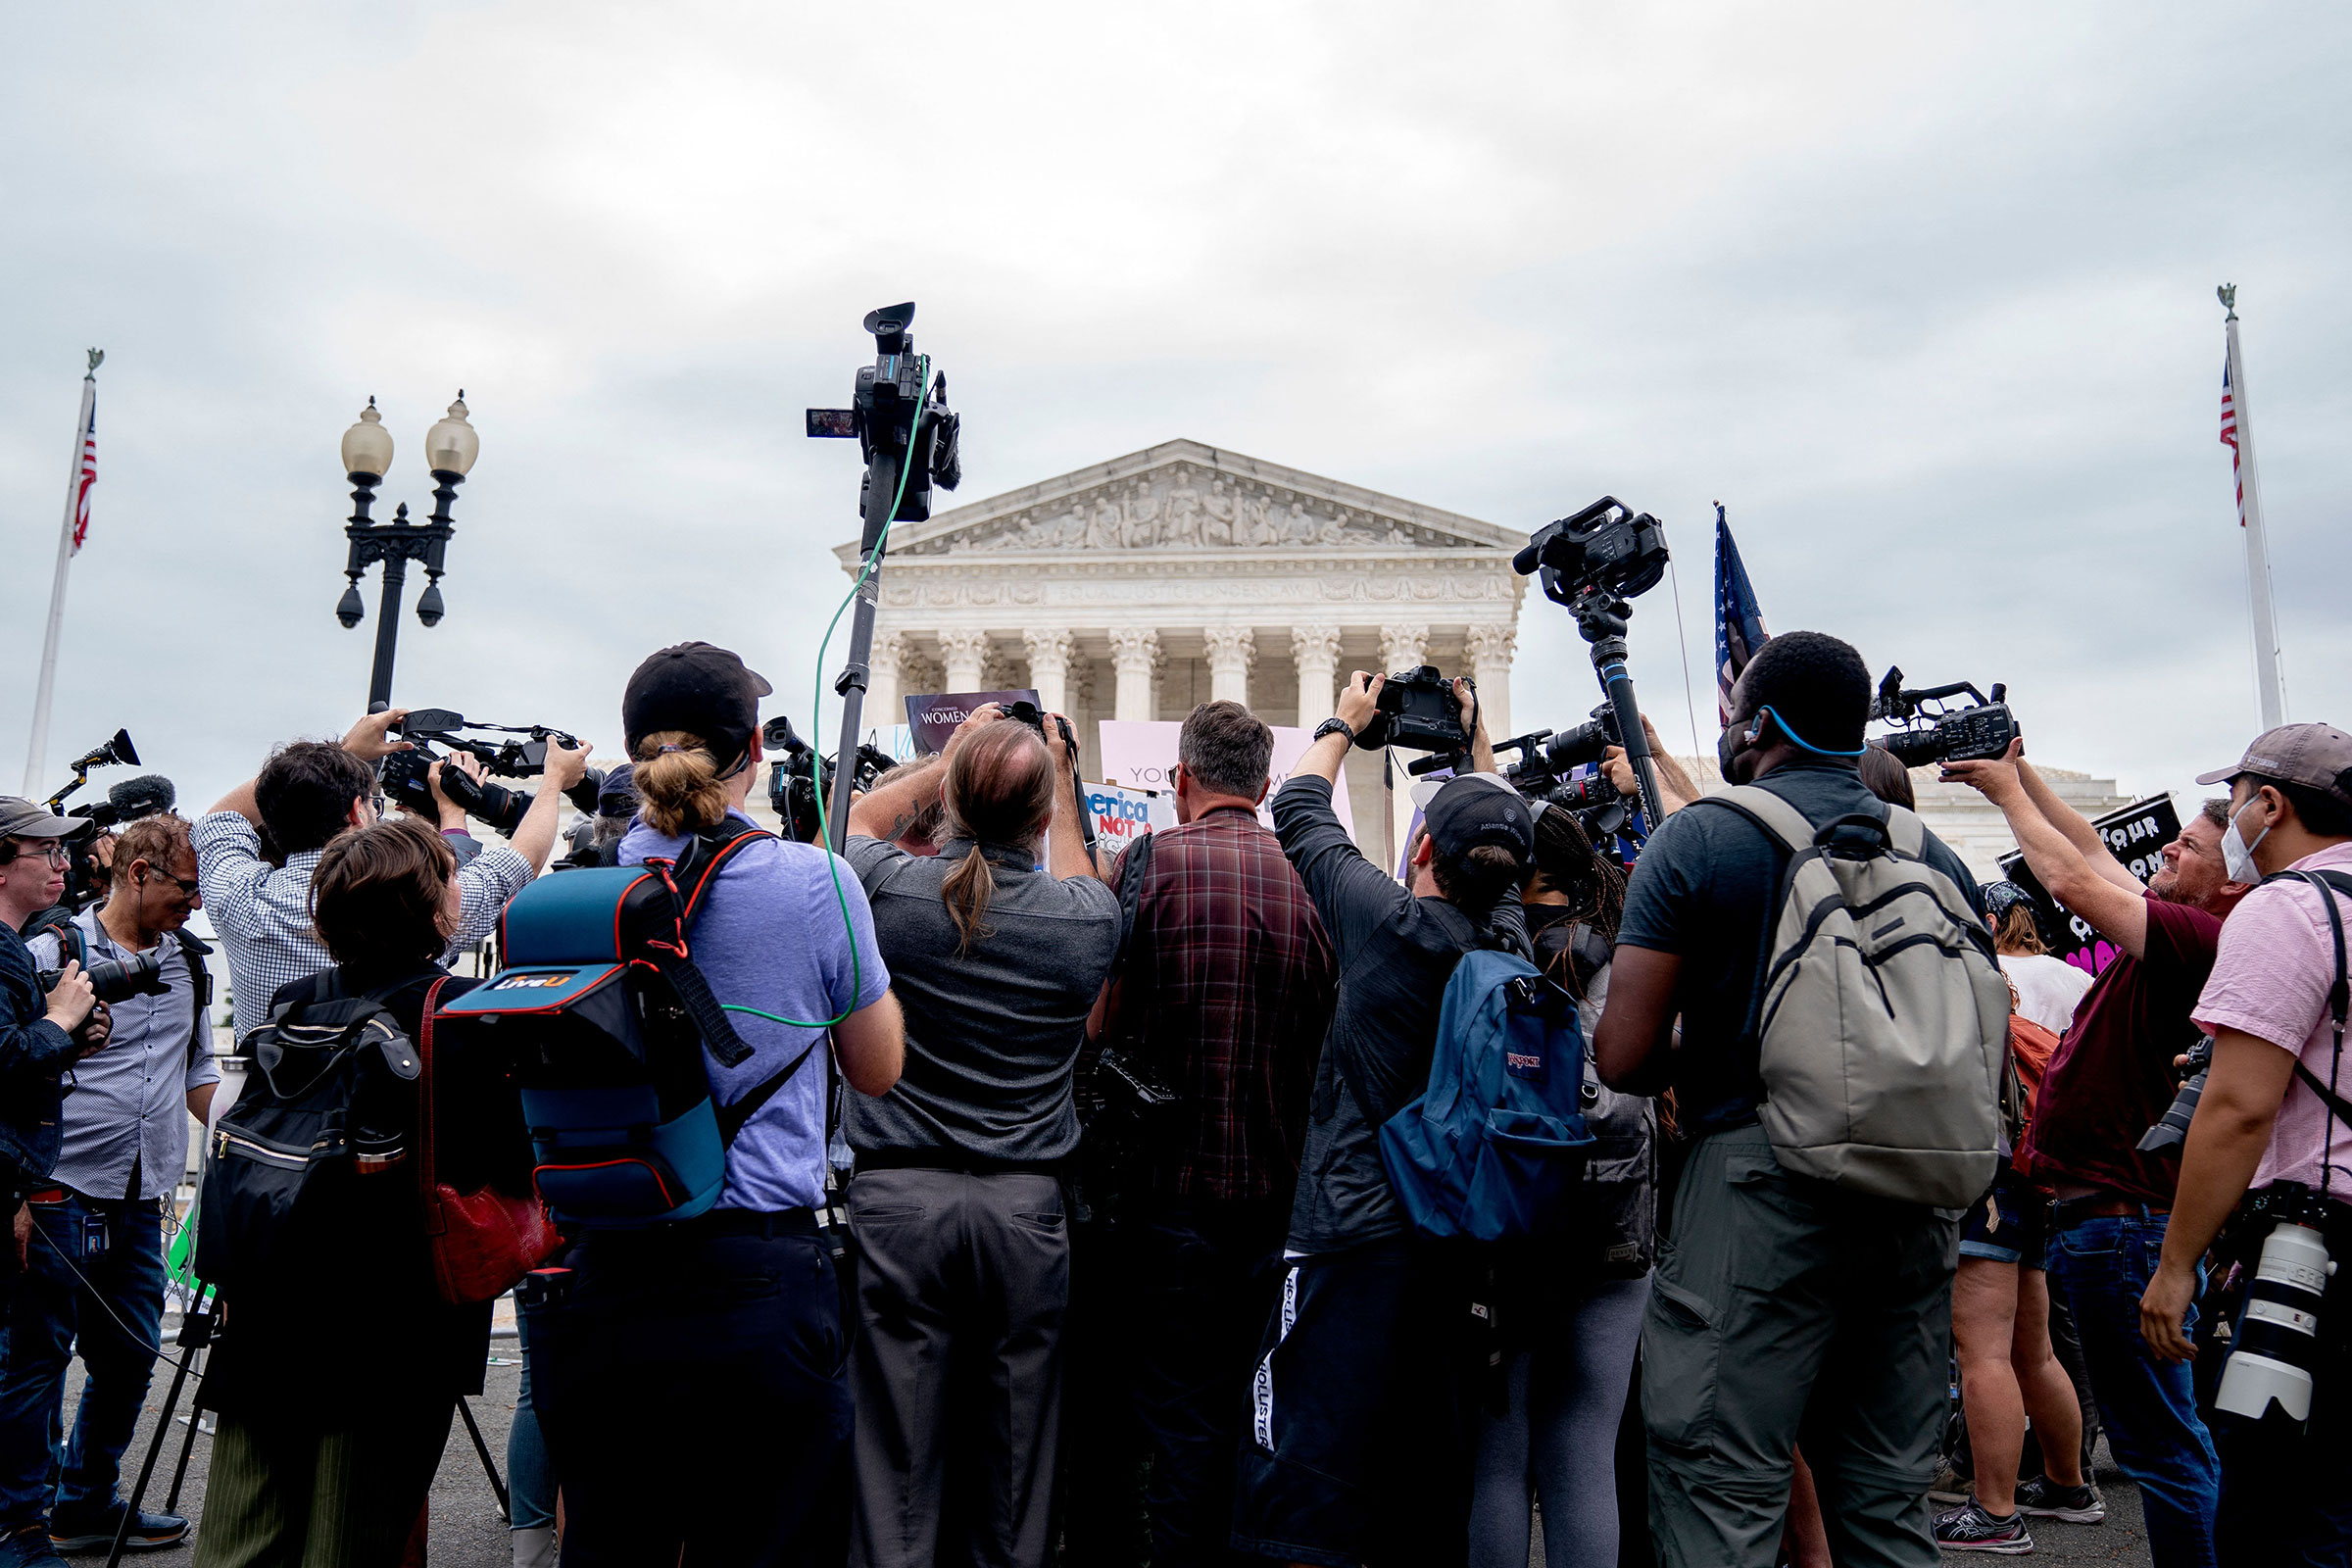 Members of the media gather around anti-abortion and abortion activists demonstrating outside the Supreme Court in Washington, on June 21, 2022. (Stefani Reynolds—AFP/Getty Images)